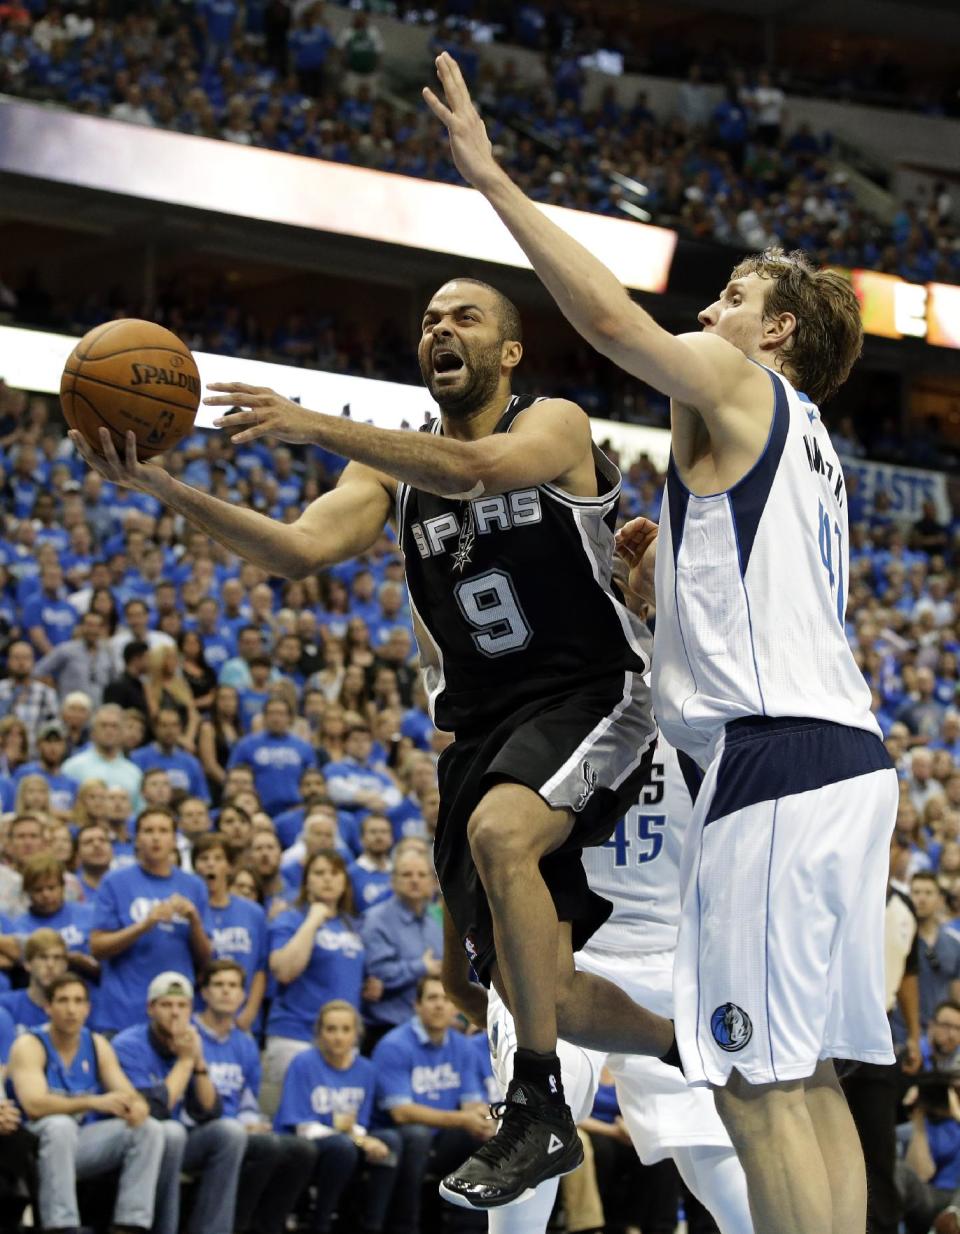 San Antonio Spurs' Tony Parker (9), of France, goes up for a score against Dallas Mavericks' Dirk Nowitzki, of Germany, late in the second half of Game 6 of an NBA basketball first-round playoff series on Friday, May 2, 2014, in Dallas. The Mavericks won 113-111. (AP Photo/Tony Gutierrez)